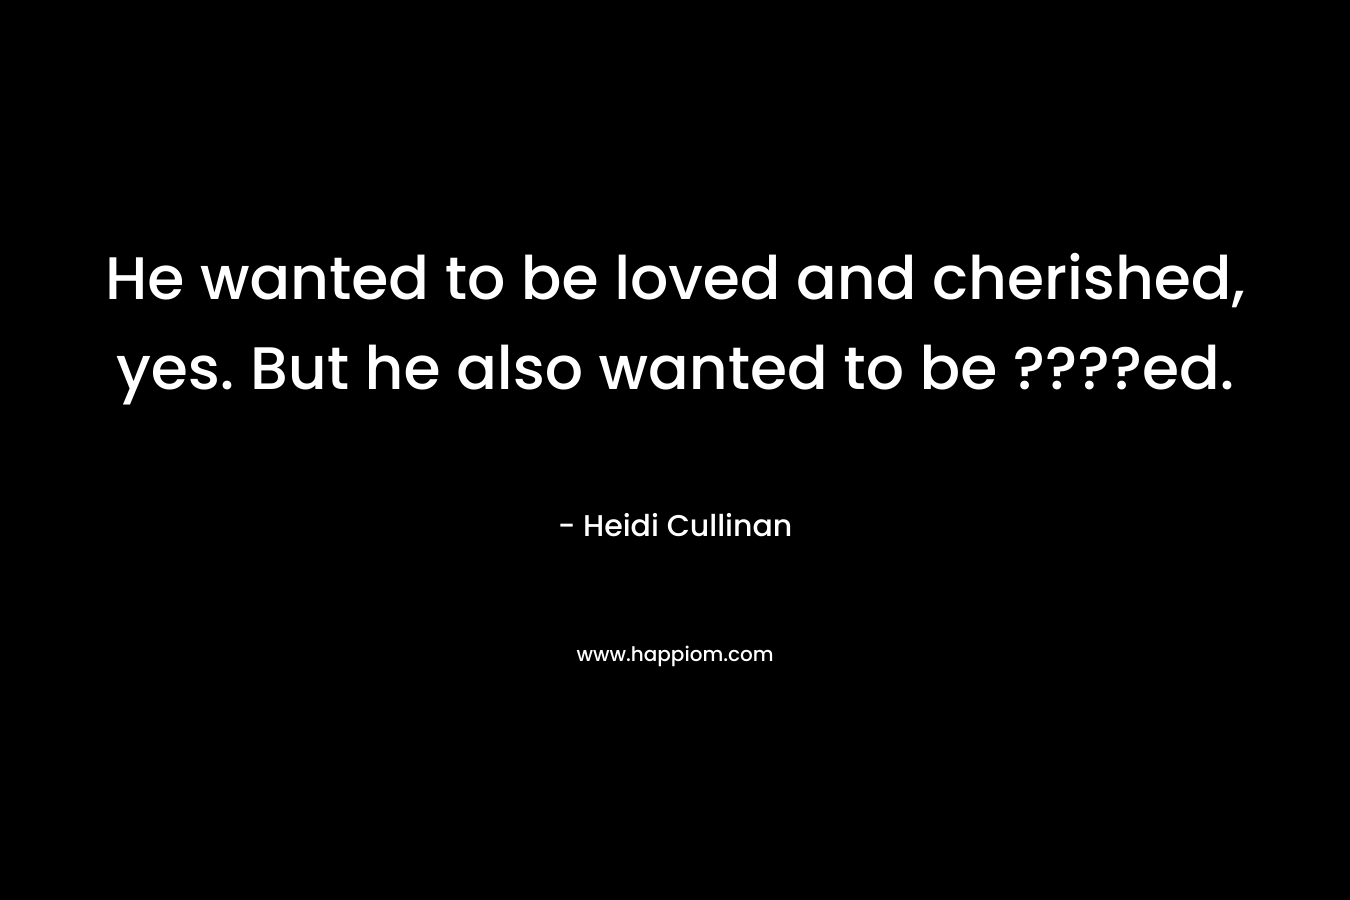 He wanted to be loved and cherished, yes. But he also wanted to be ????ed. – Heidi Cullinan